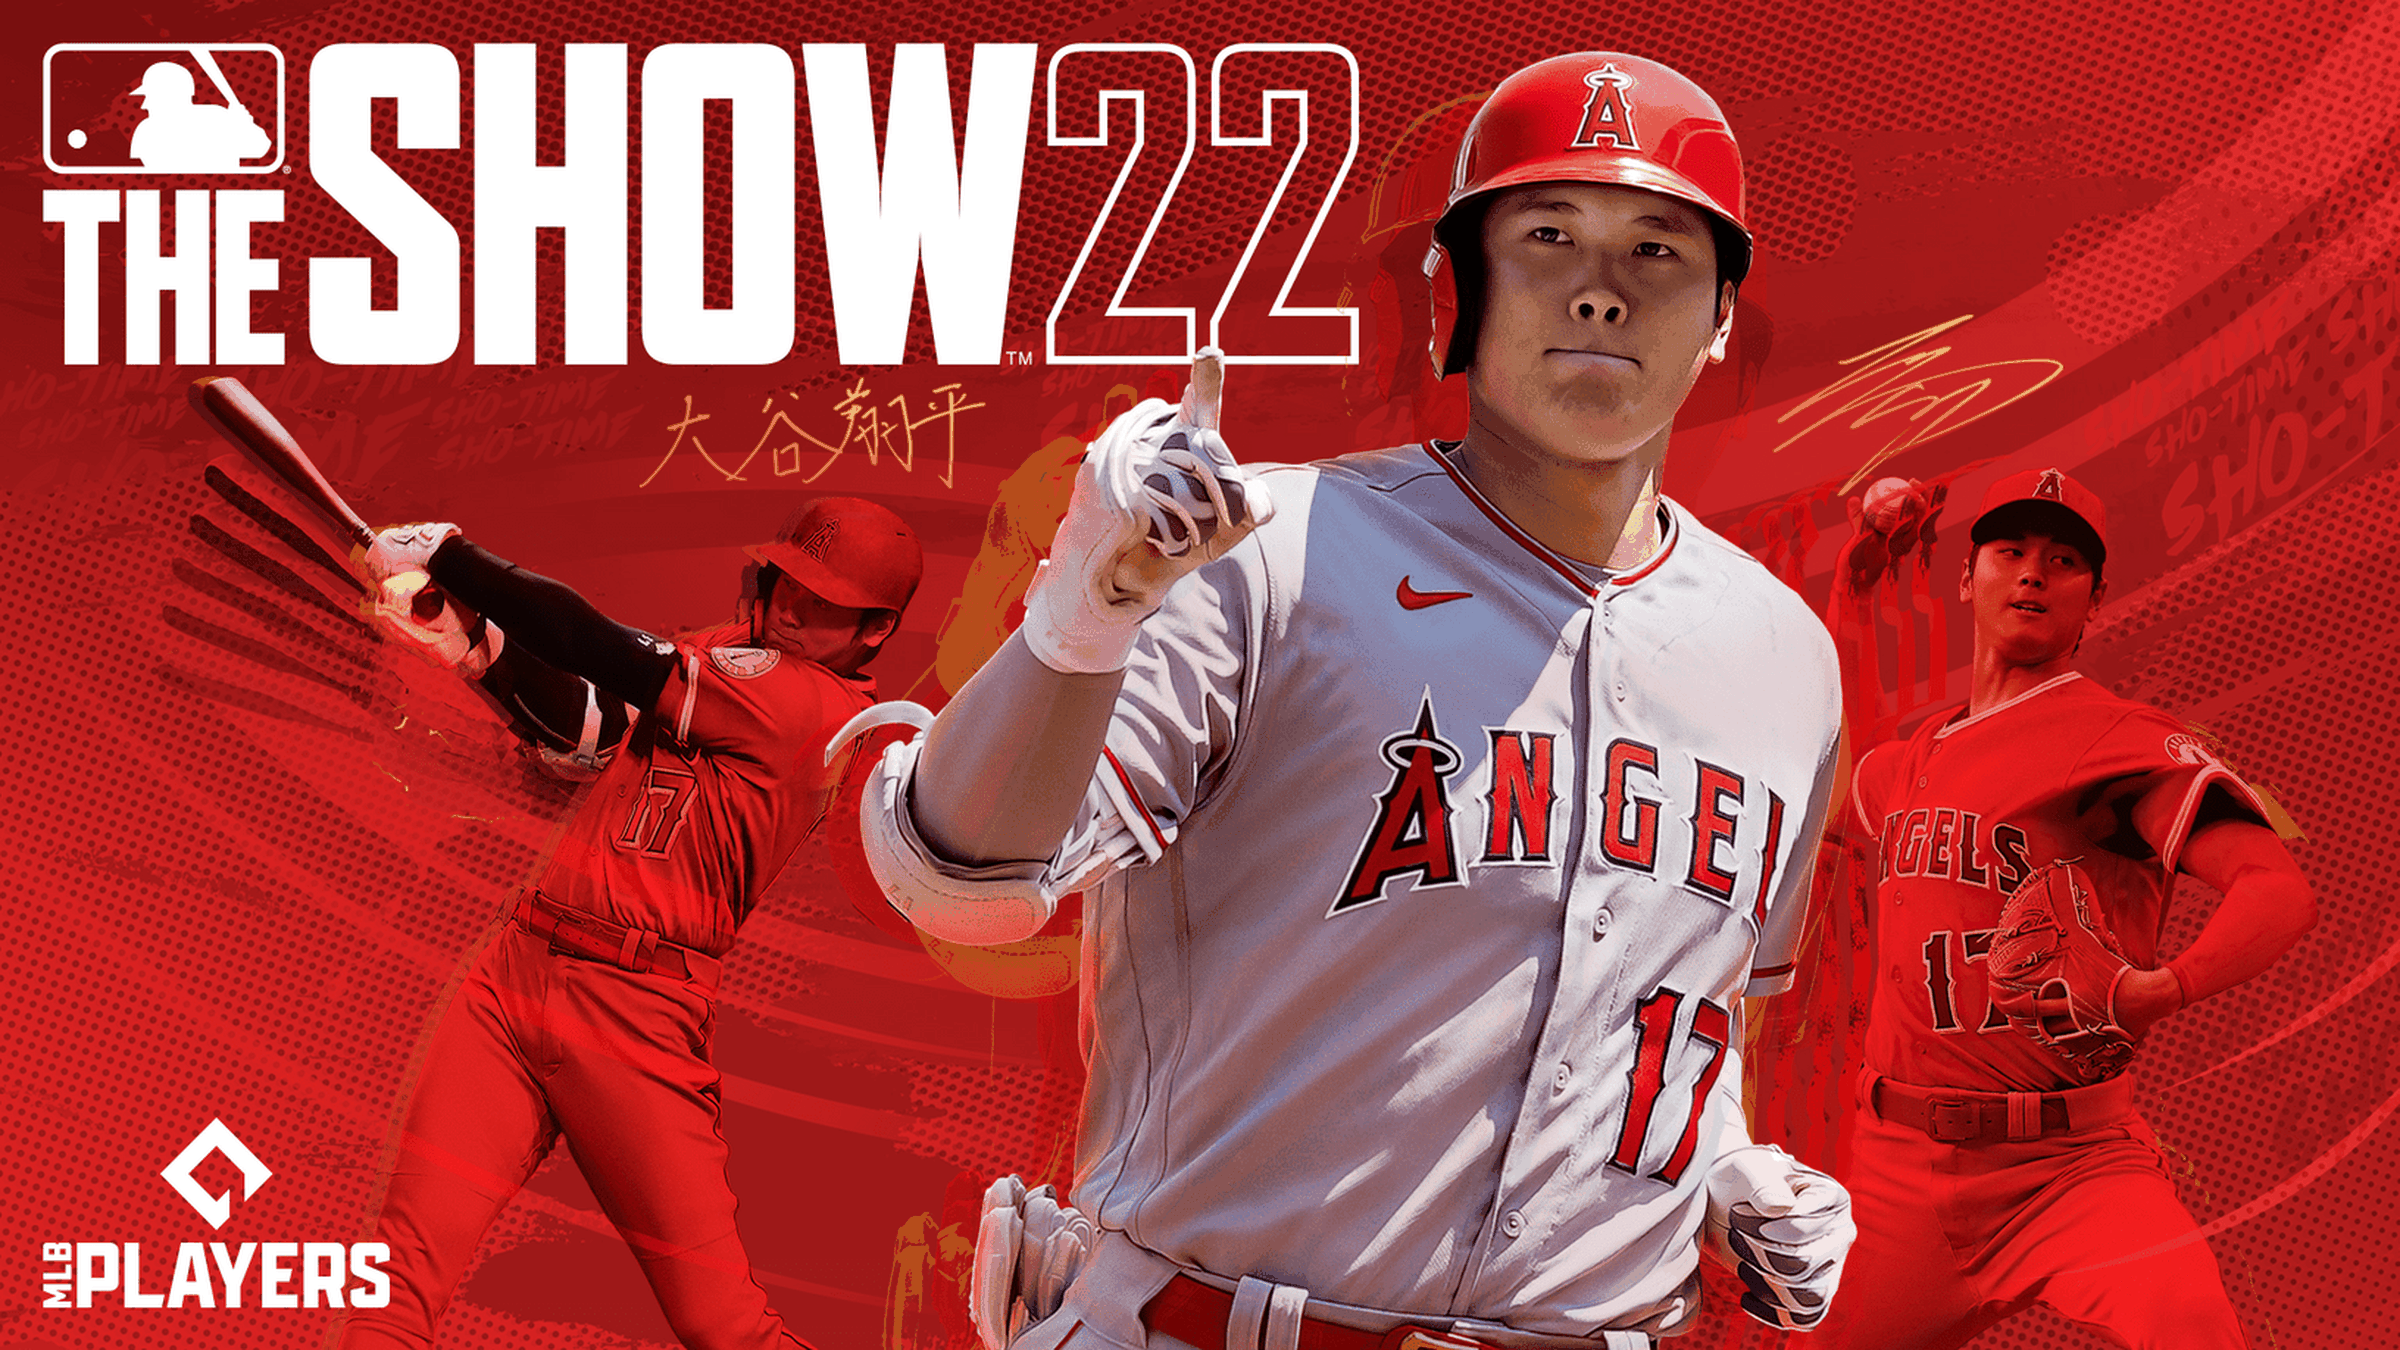 Shohei Ohtani is 2022’s cover athlete.